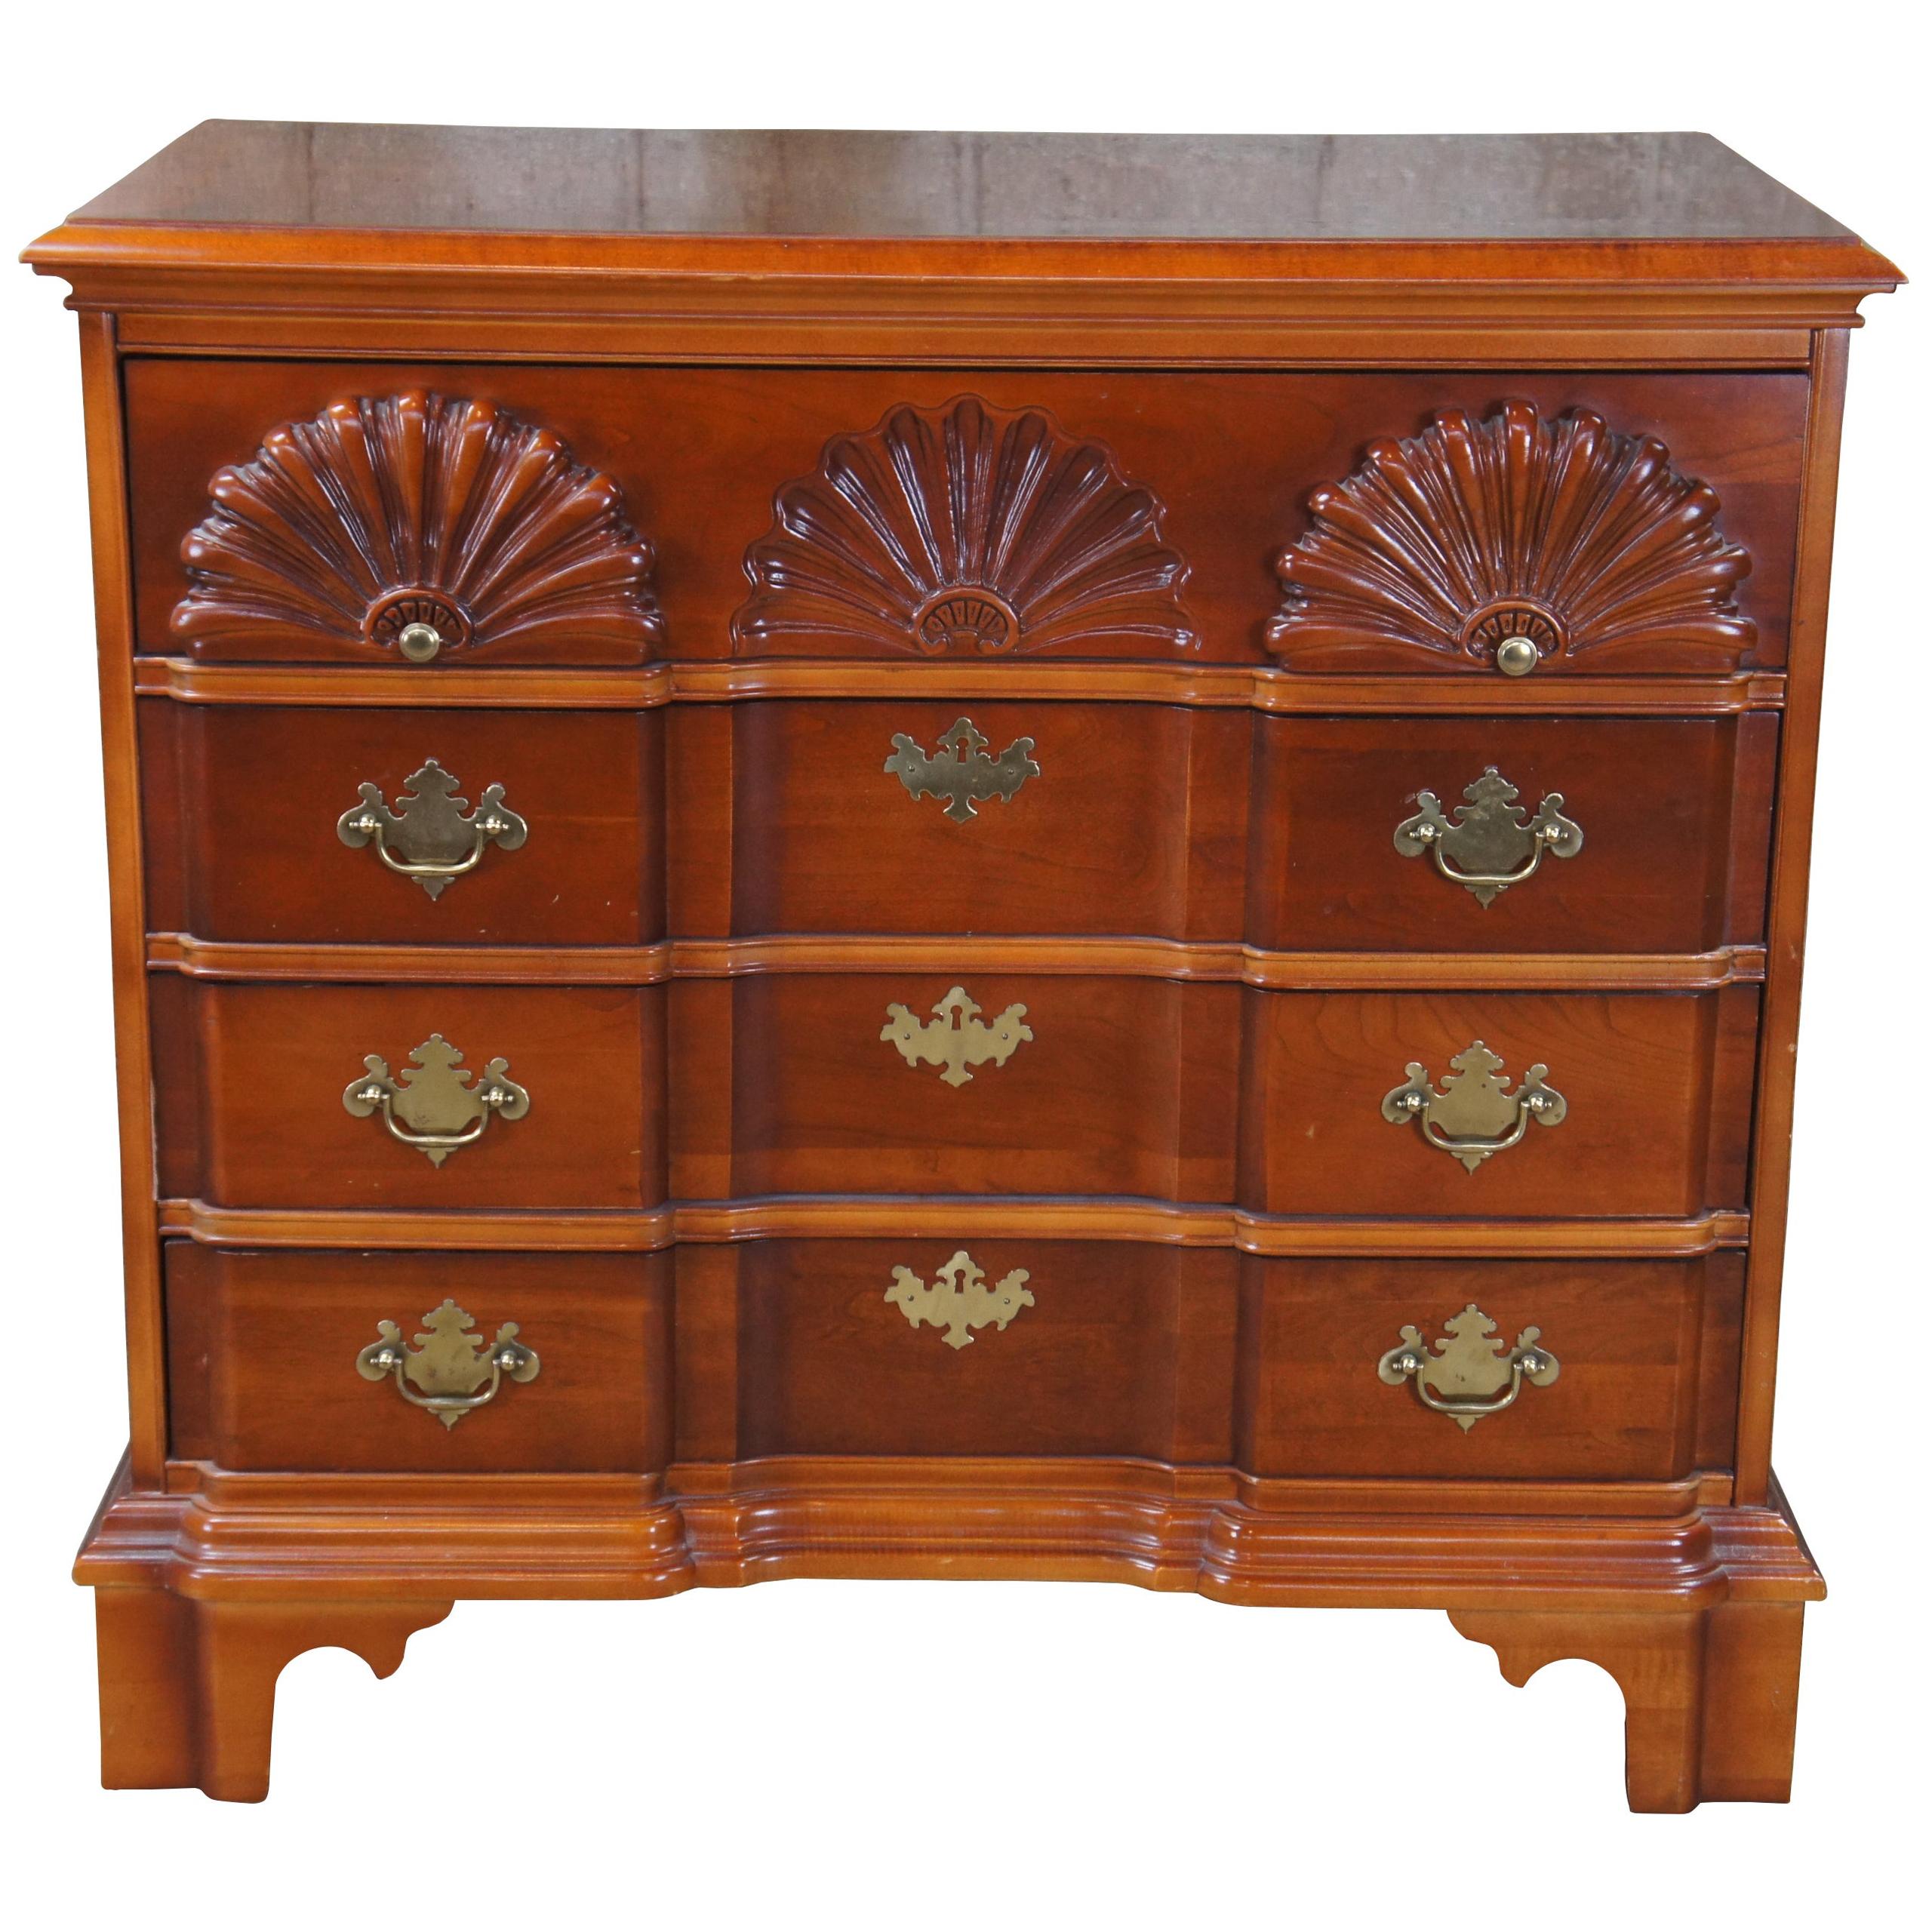 chest craftsman stanley Chest stanley Stanley by the american furniture at furniture, Sale Goddard | collection Craftsman craftsman For stanley, collection american Dresser Blockfront Bachelors bachelor 1stDibs by Cherry American